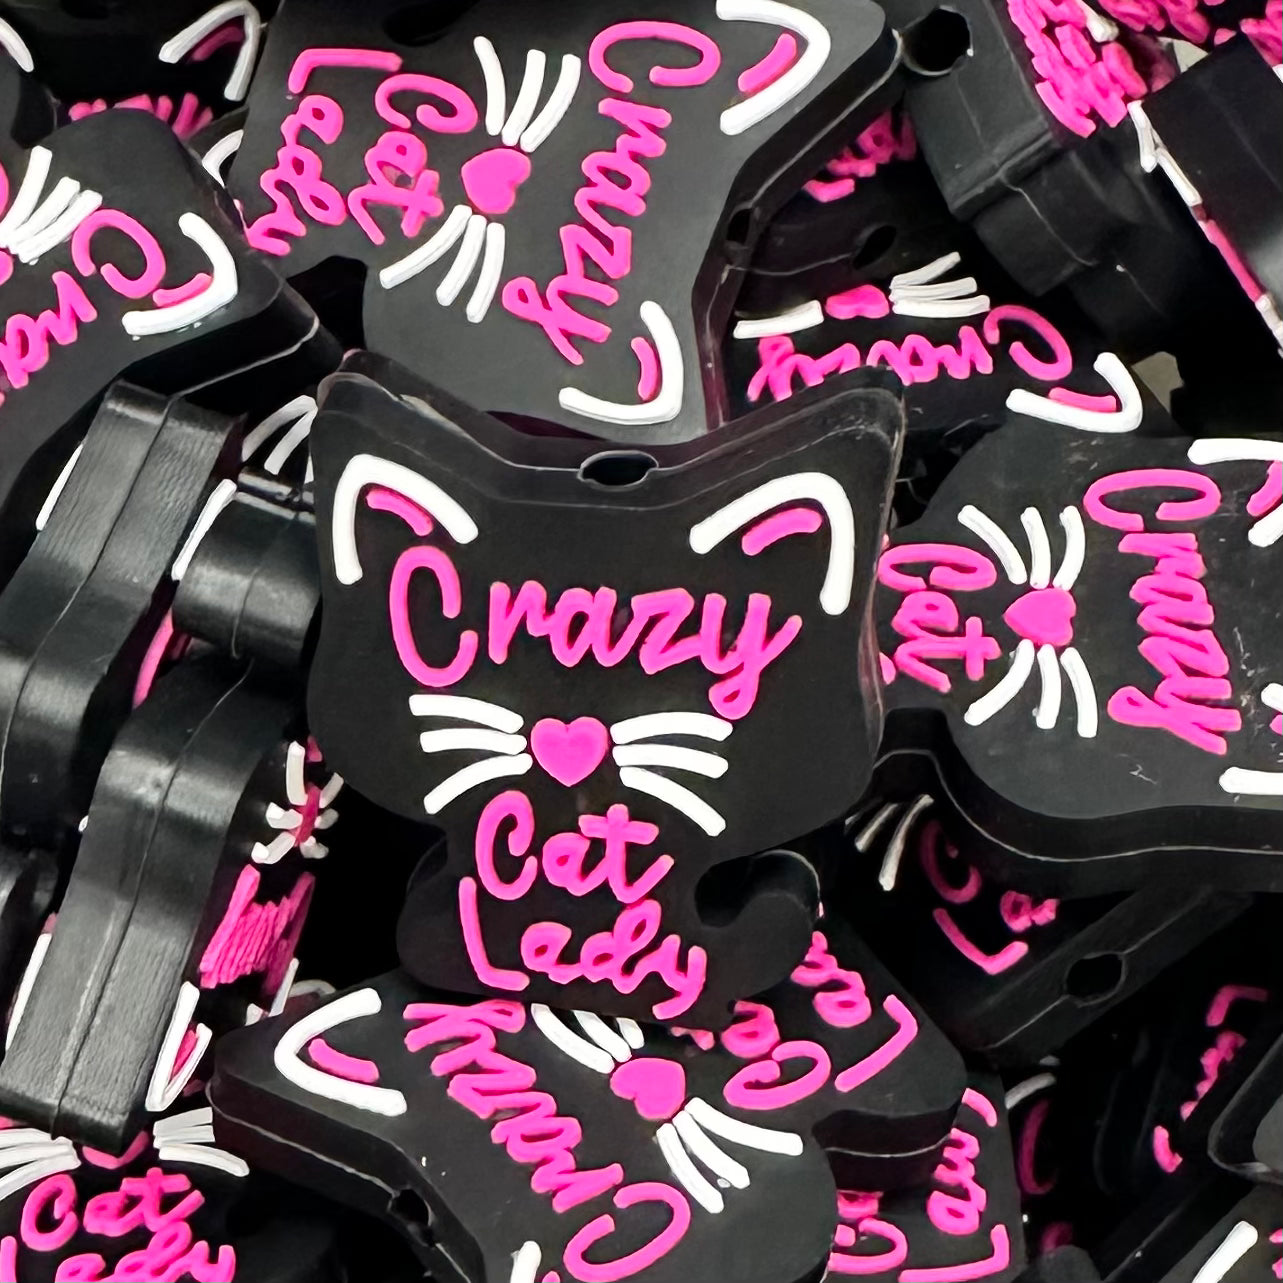 Focal Bead, Crazy Cat Lady-Pink on Black